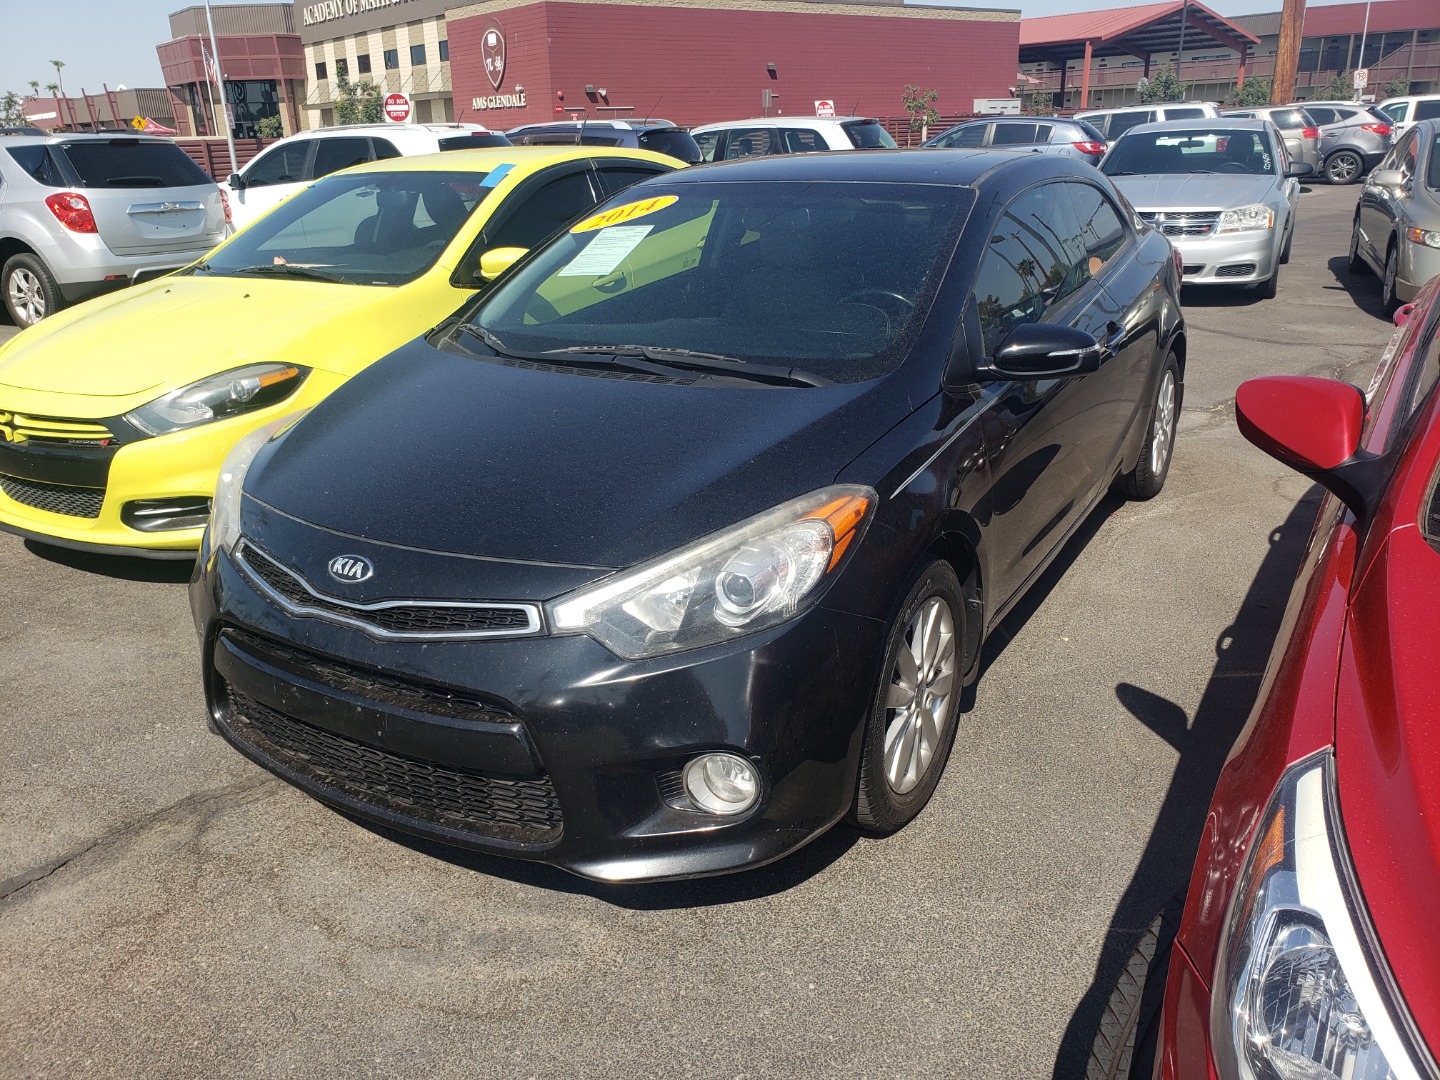 Pre-Owned 2014 Kia FORTE KOUP 2 DOOR COUPE 2dr Car in Mesa #RG28474 ...